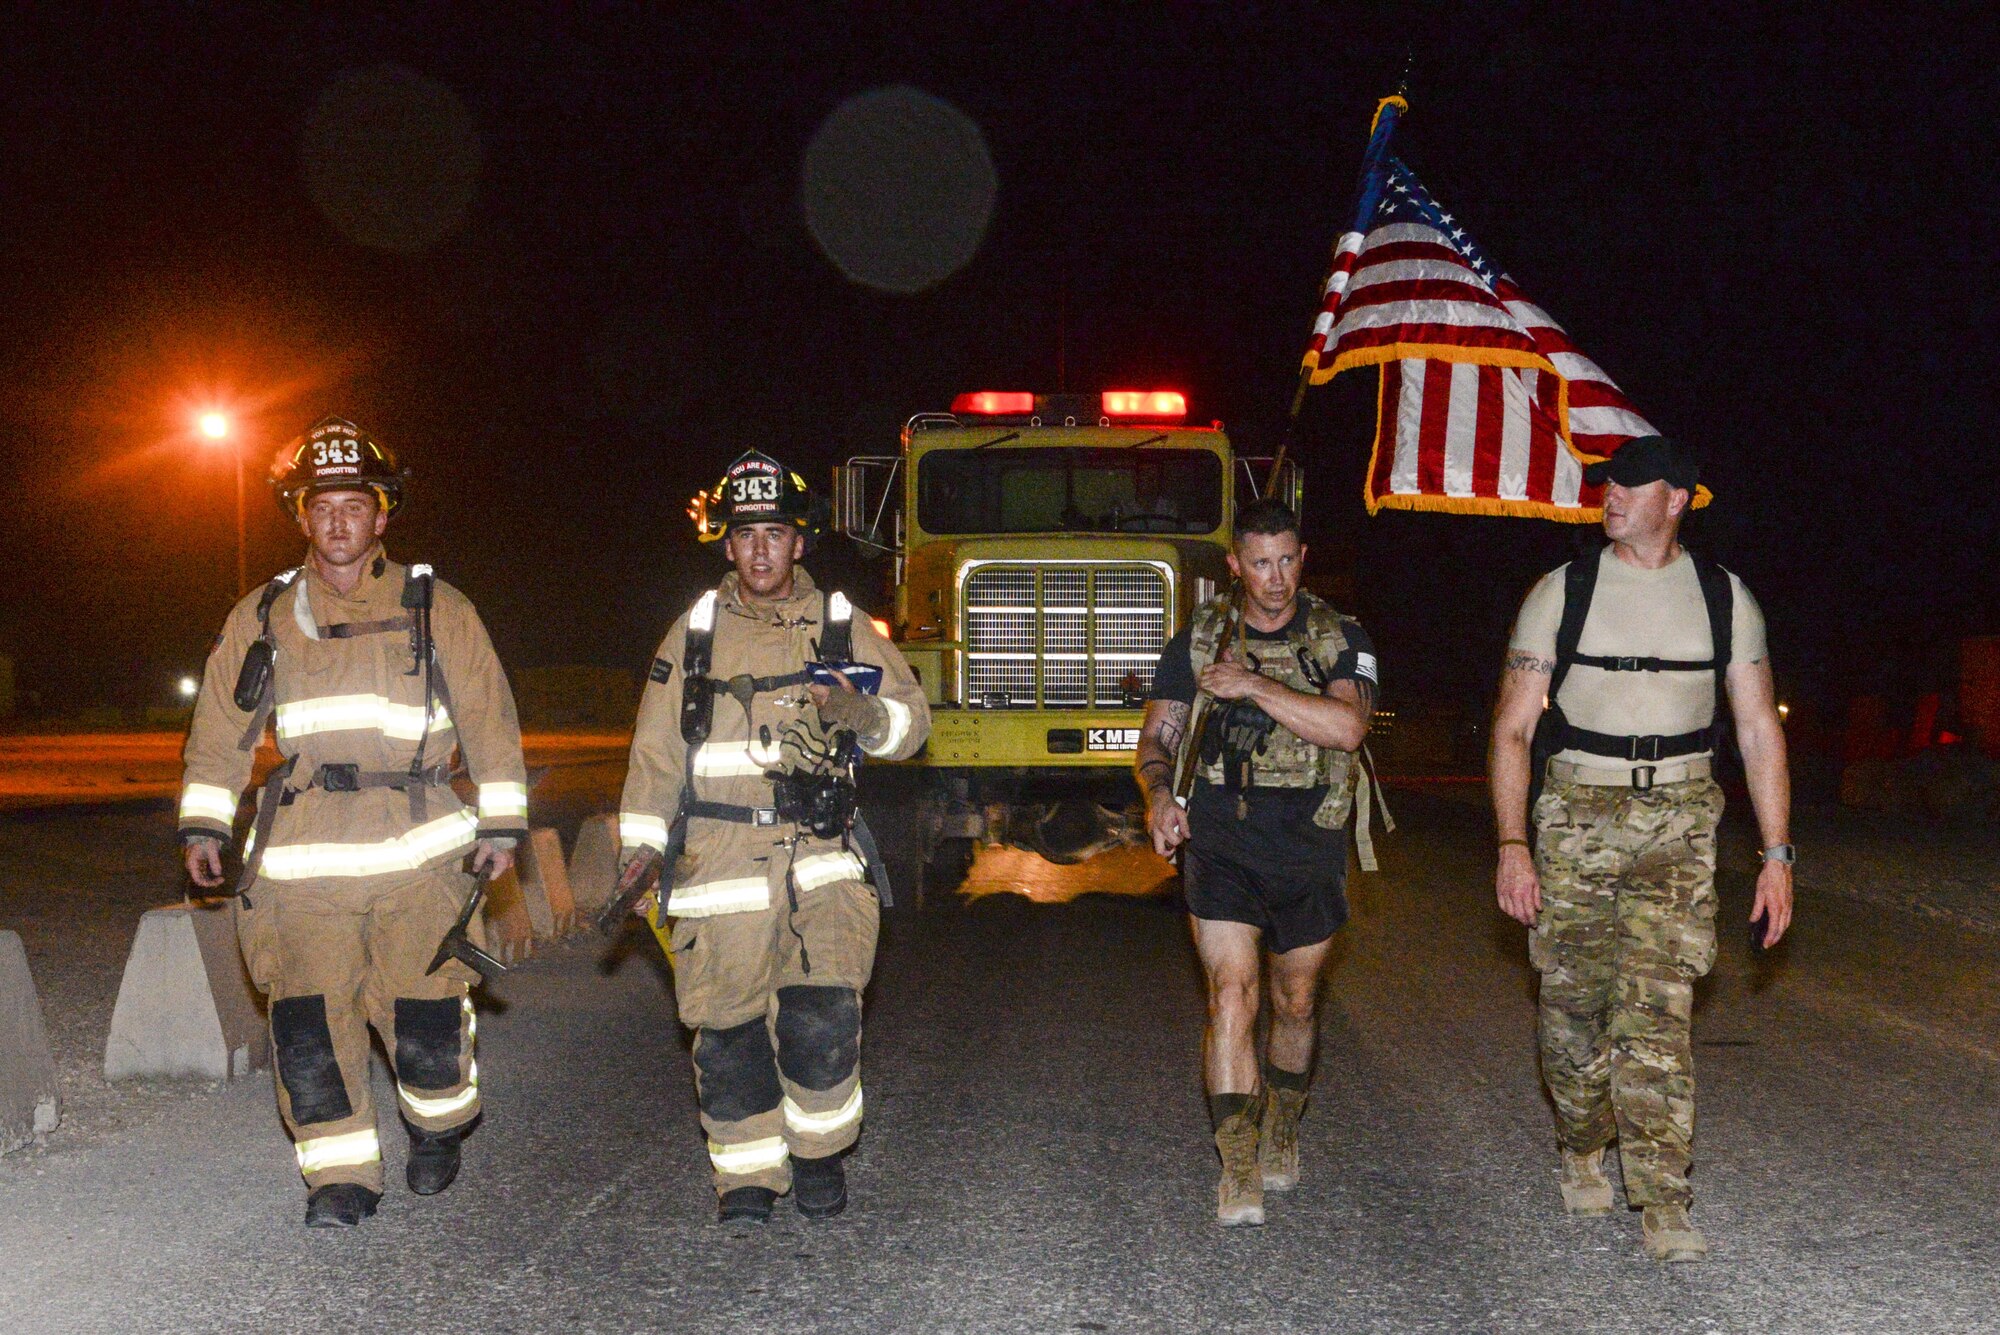 U.S. Air Force Senior Airmen, Cayden Saurbek, left, and John Hodgkind, left center, firefighters assigned to the 379th Expeditionary Civil Engineering Squadron, join Master Sgt. Jason Garrett, holding the flag, security forces member and Capt. Roy Blackledge, right, operations support officer assigned to the 379th Expeditionary Security Forces Squadron, to participate in an evening 9/11 memorial walk at Al Udeid Air Base, Qatar, Sept. 11, 2017.